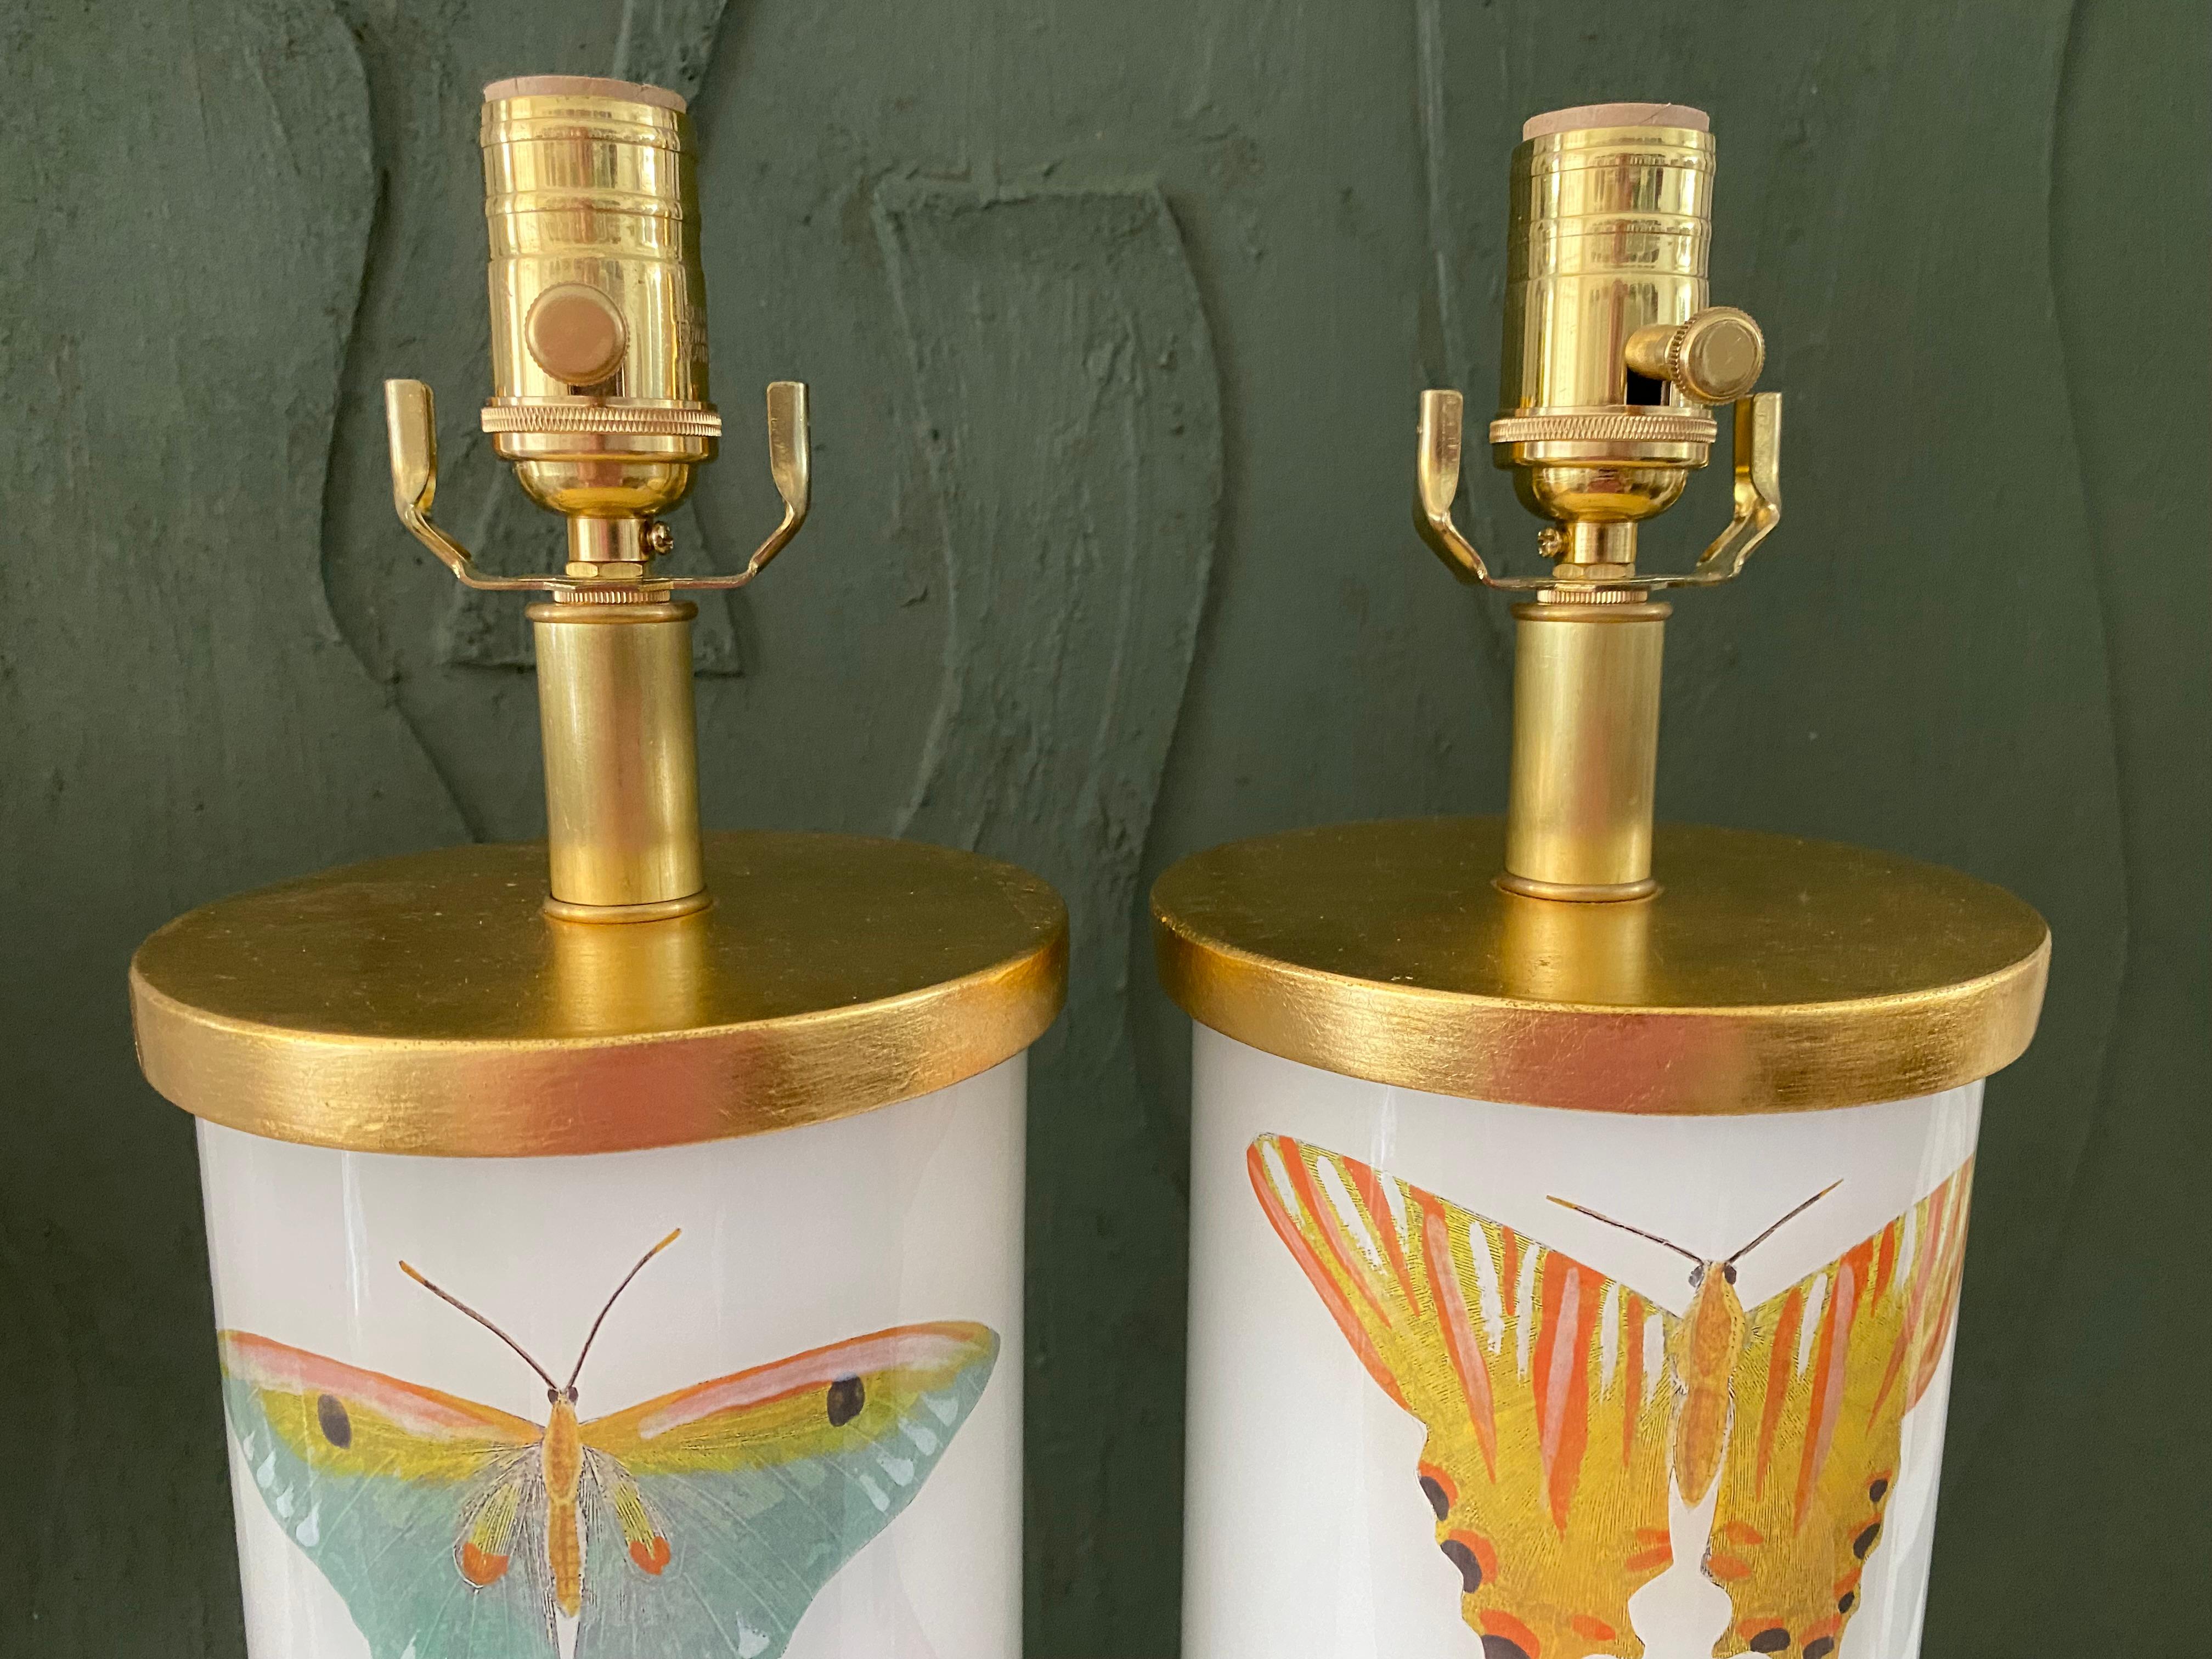 American Liz Marsh Designs Pair of Decoupage Butterfly Study Lamps For Sale